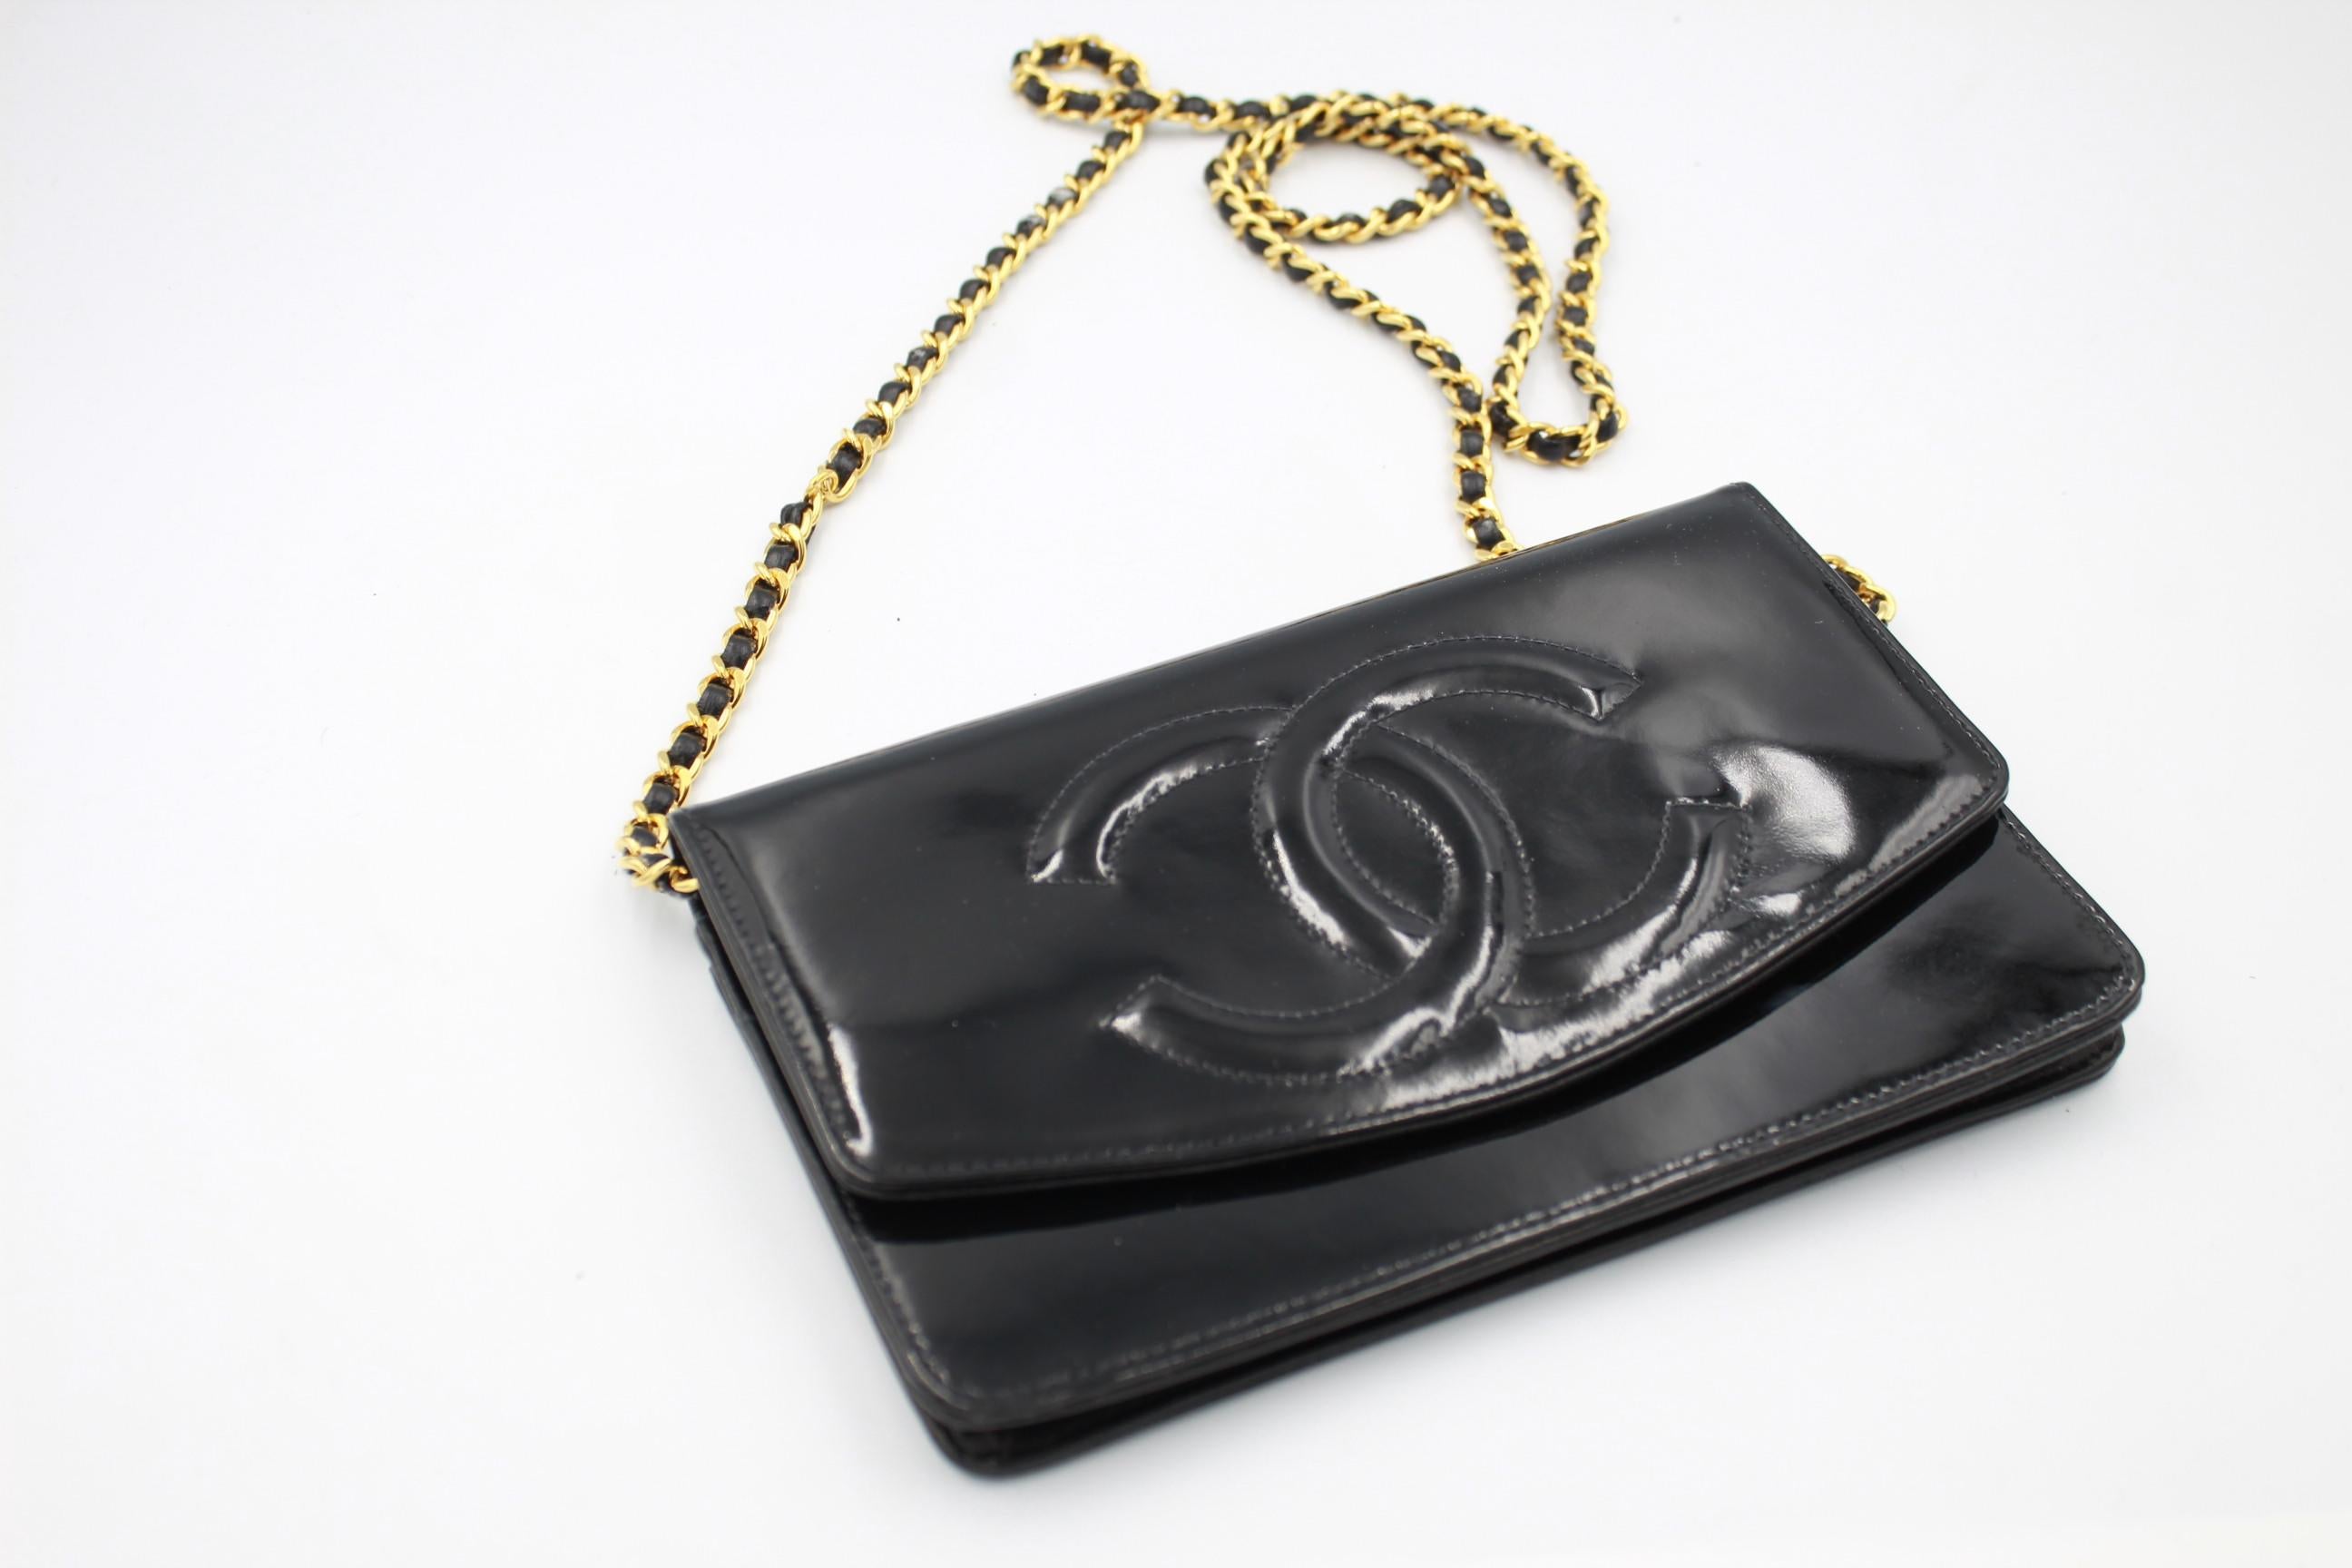 1996 Vintage Chanel jean WOC with crossbody chain.
Good vintage condition but shows ssome use.
Interior with multiple pockets.Hologram but no card
Size 21x12
Marked S
No hologram or card